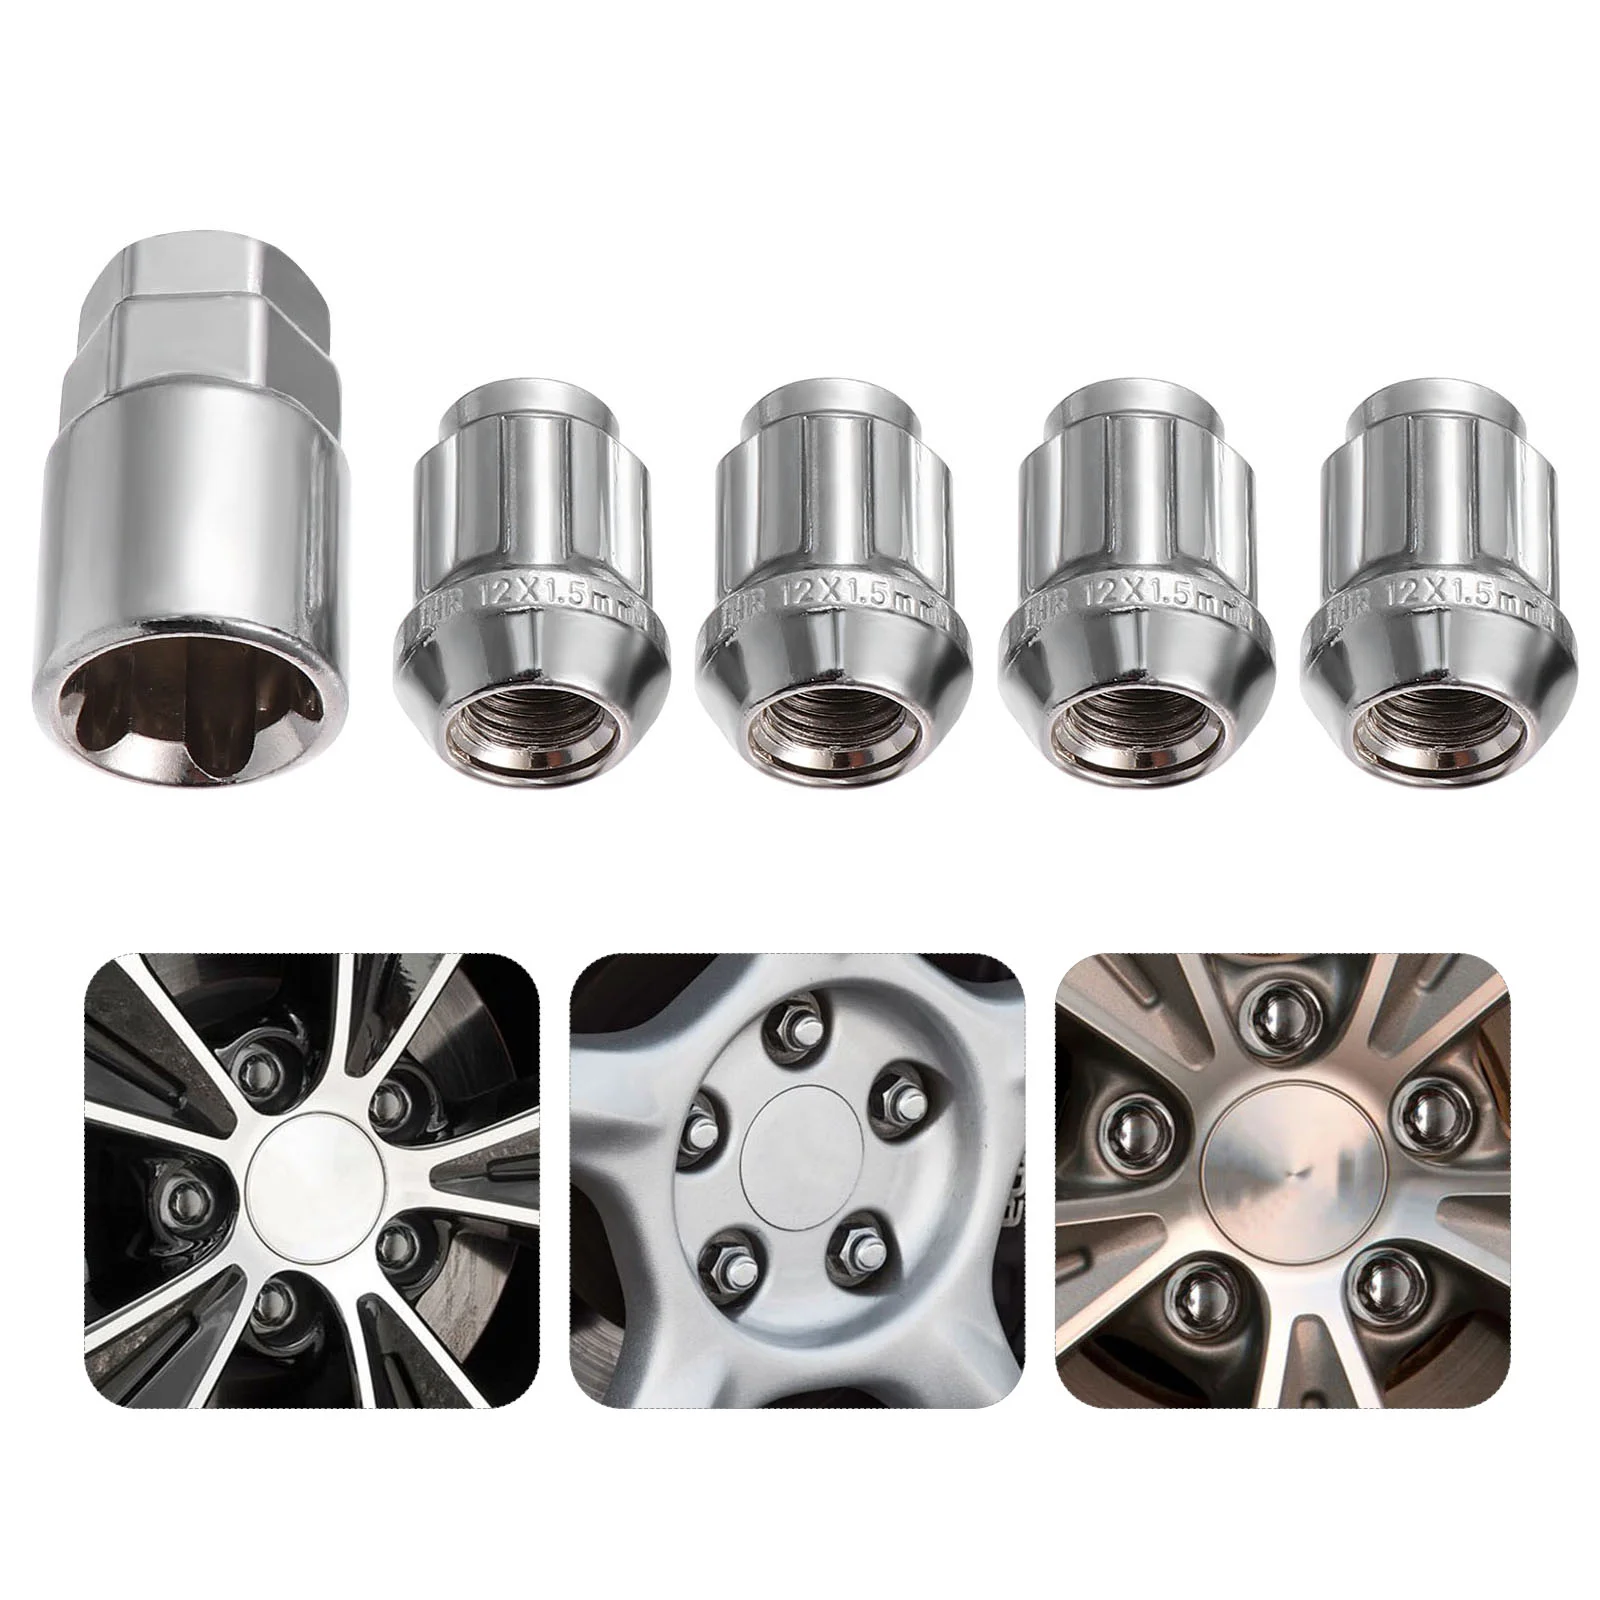 

4pcs Locking Wheel Nuts Tapered Seat Anti Theft Nuts with 1pc Socket for Car Wheels Lug